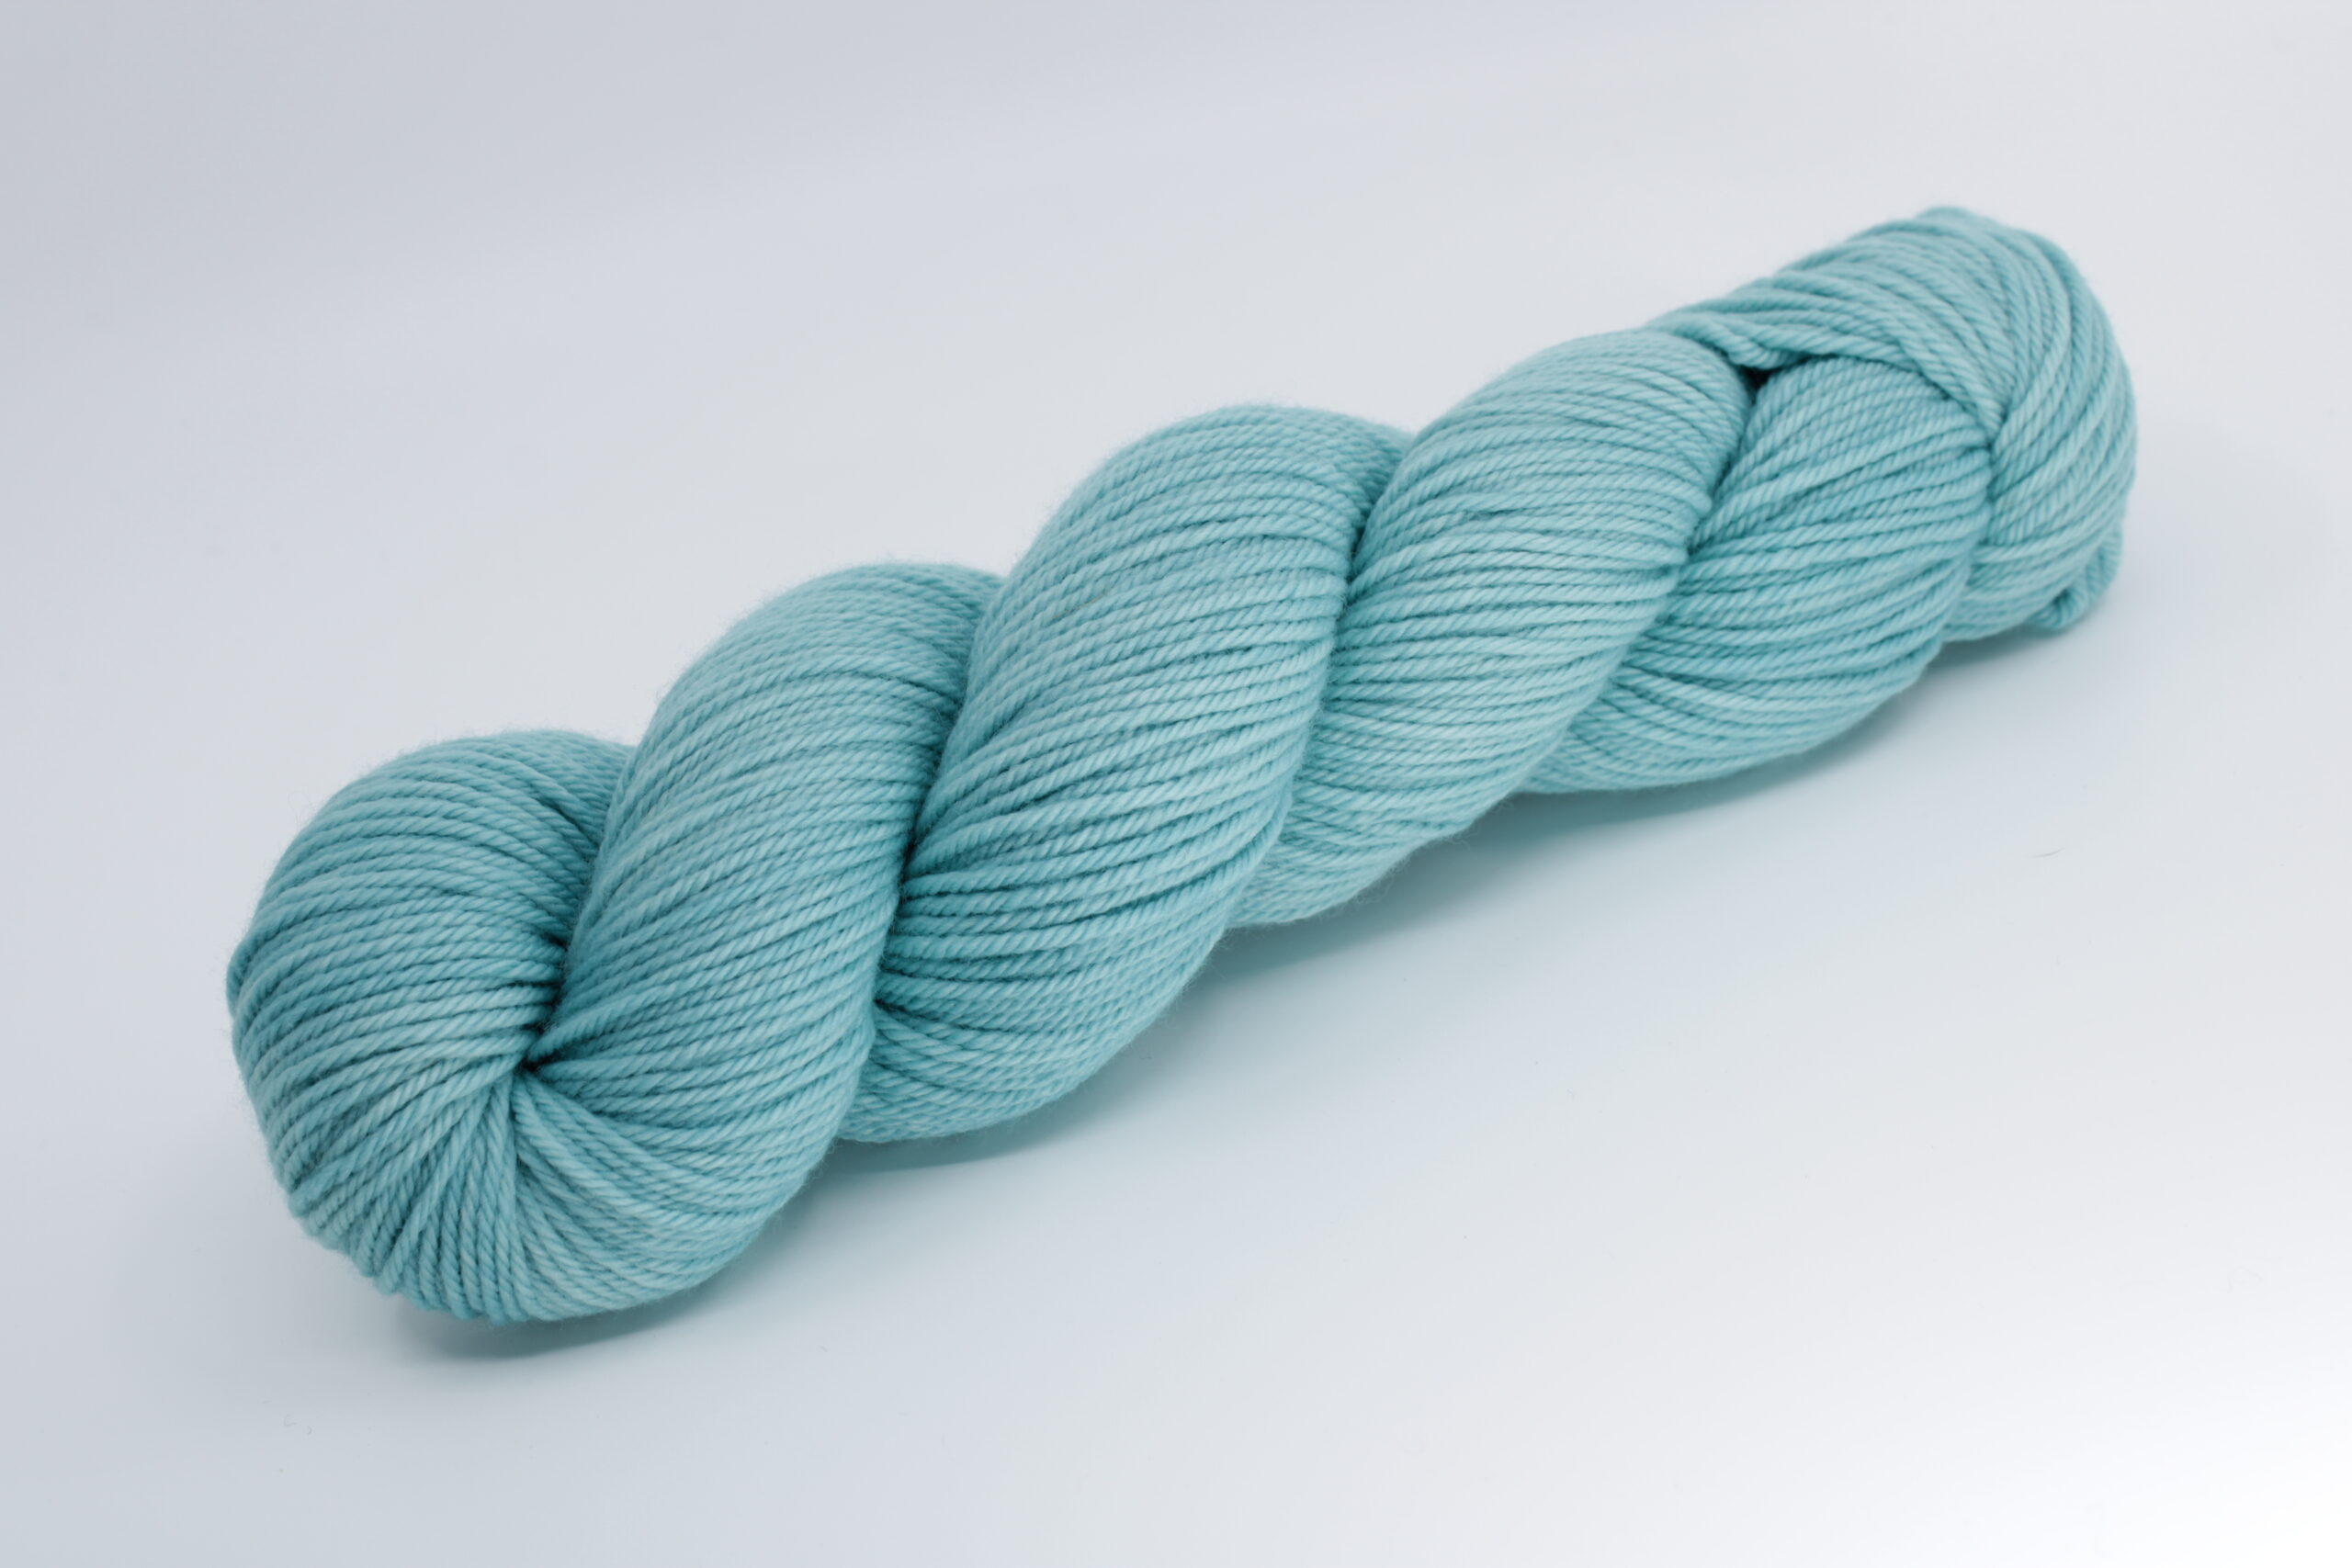 Folcon worsted base. Wool 100% untreated merino. Trio of colors: green. Color: Minty.